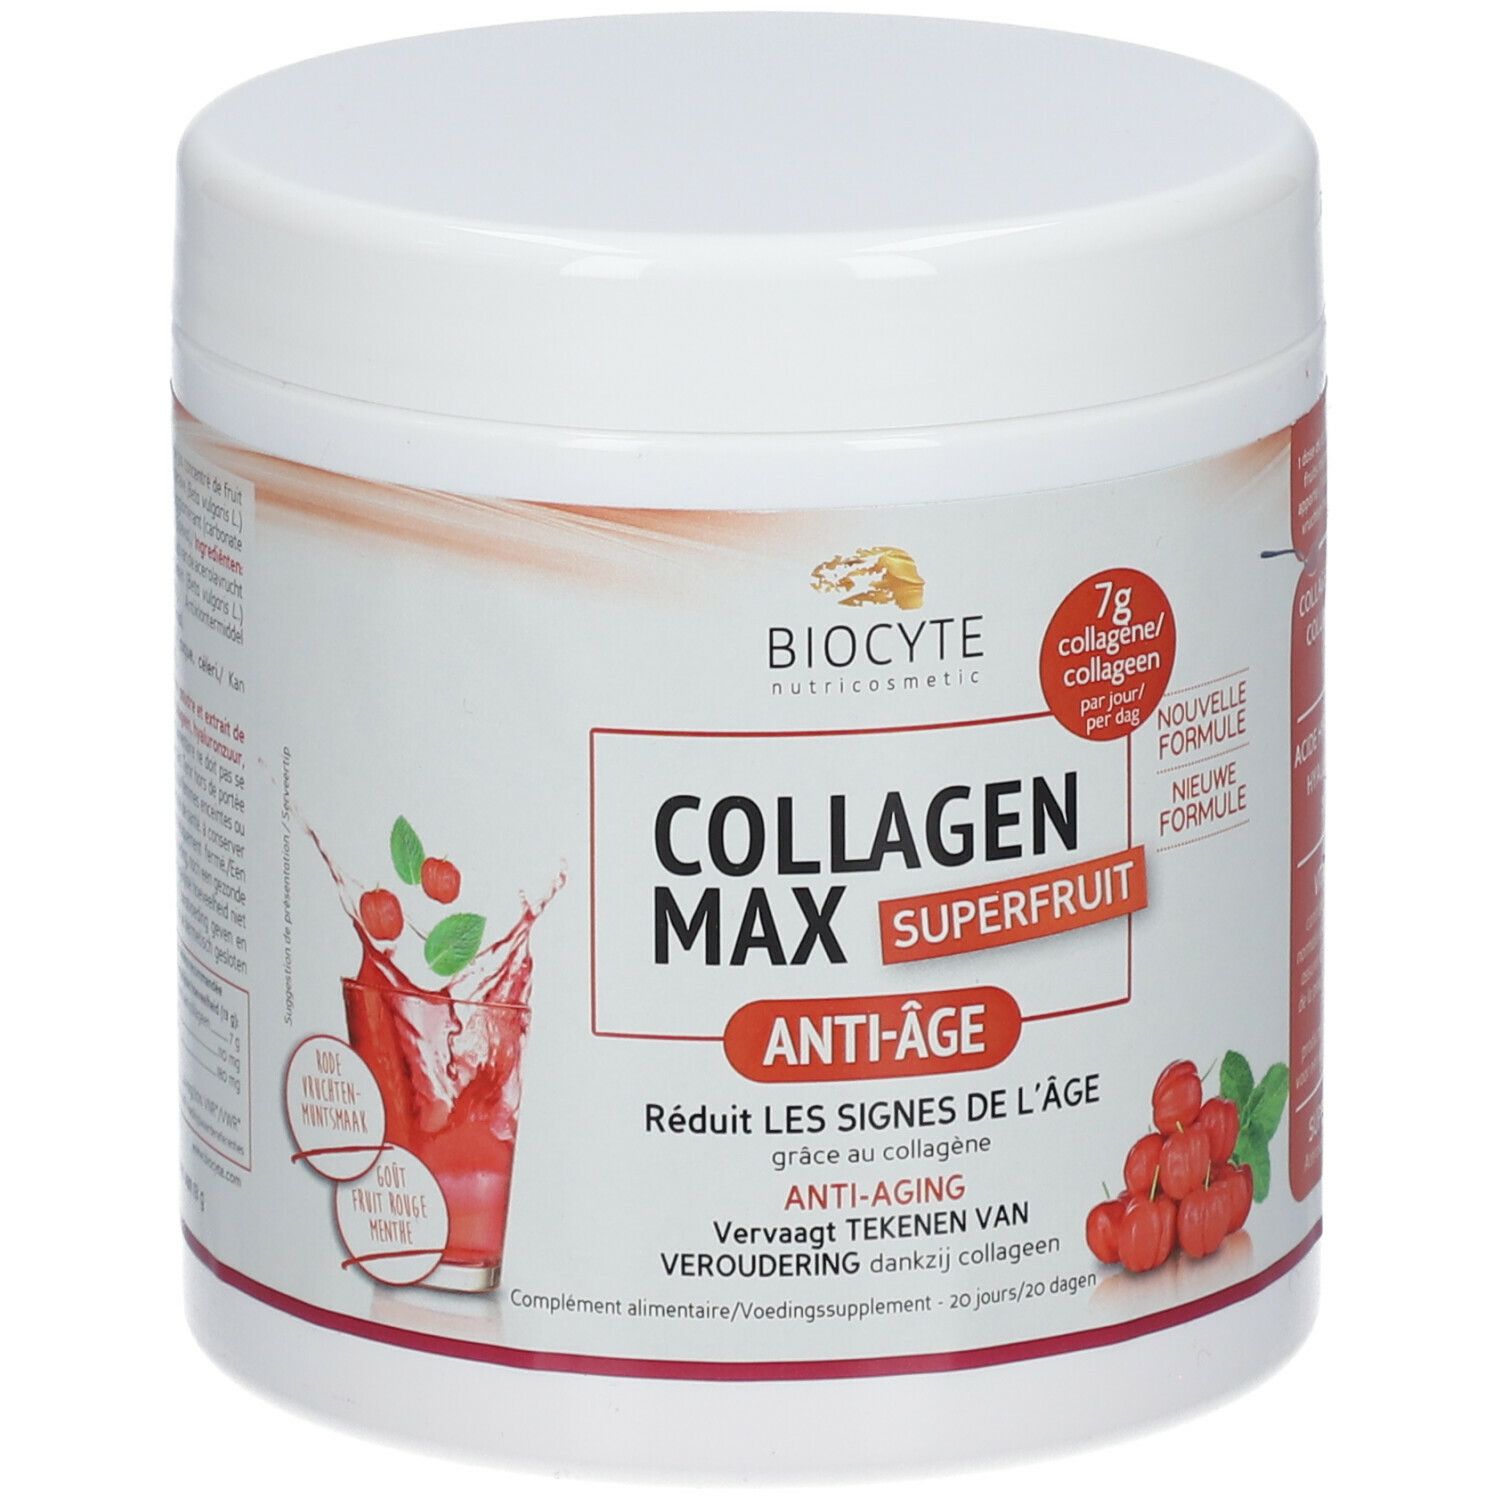 Biocyte® Collagen Max Anti-Aging Superfruits